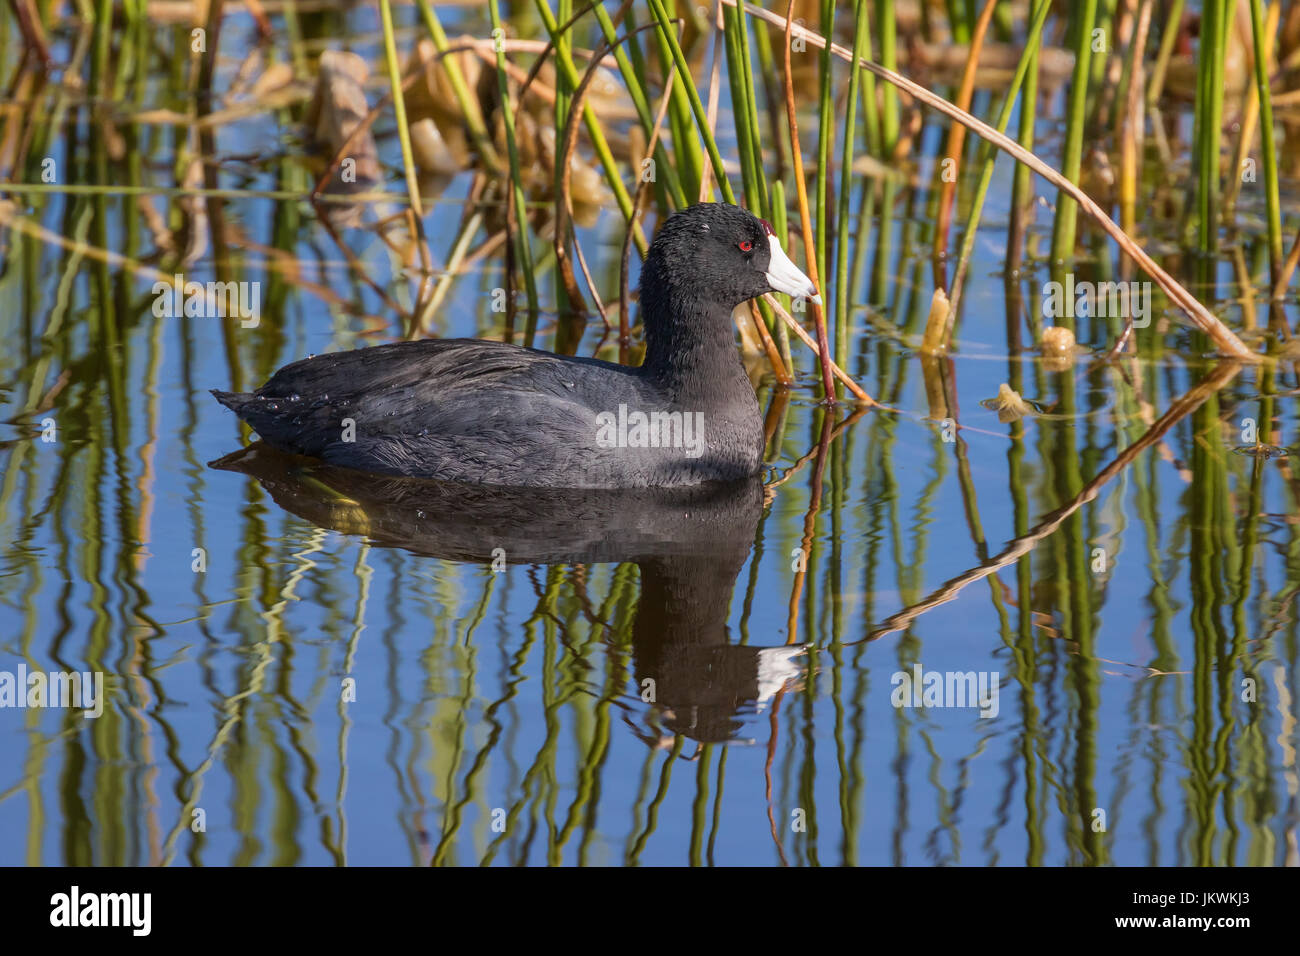 This american coot is swimming among reeds in a lake in the Viera Wetlands in Florida, USA. Stock Photo